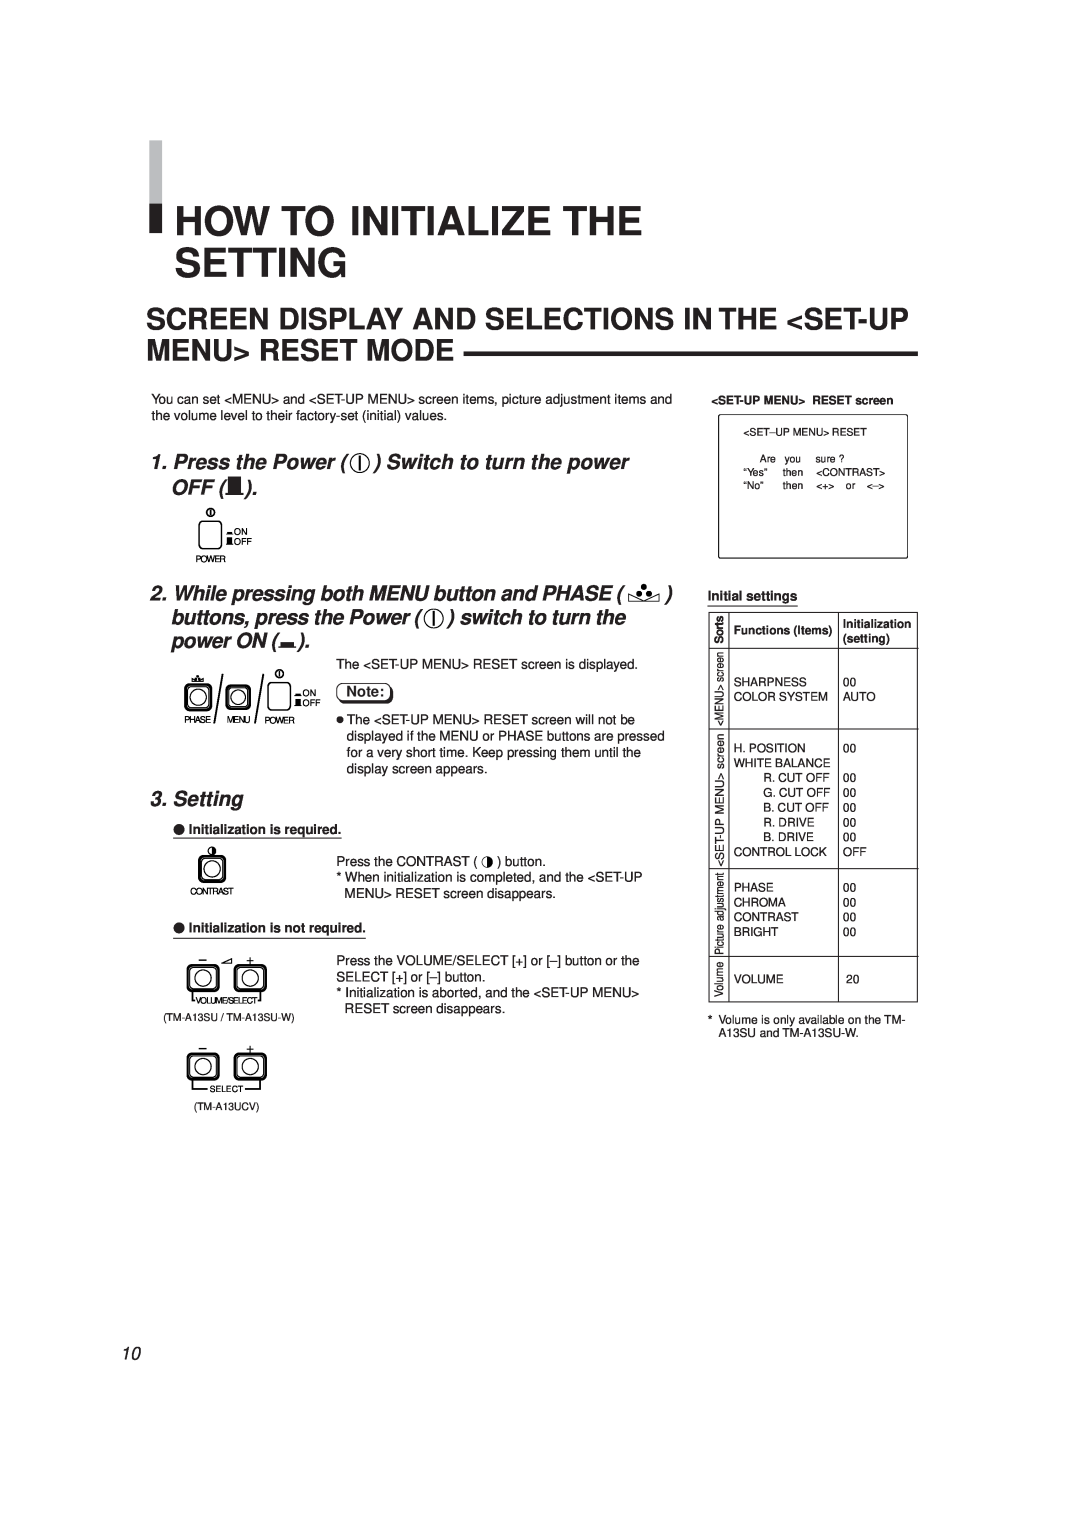 JVC TM-A13UCV manual How To Initialize The Setting, Screen Display And Selections In The Set-Up Menu Reset Mode, power ON 